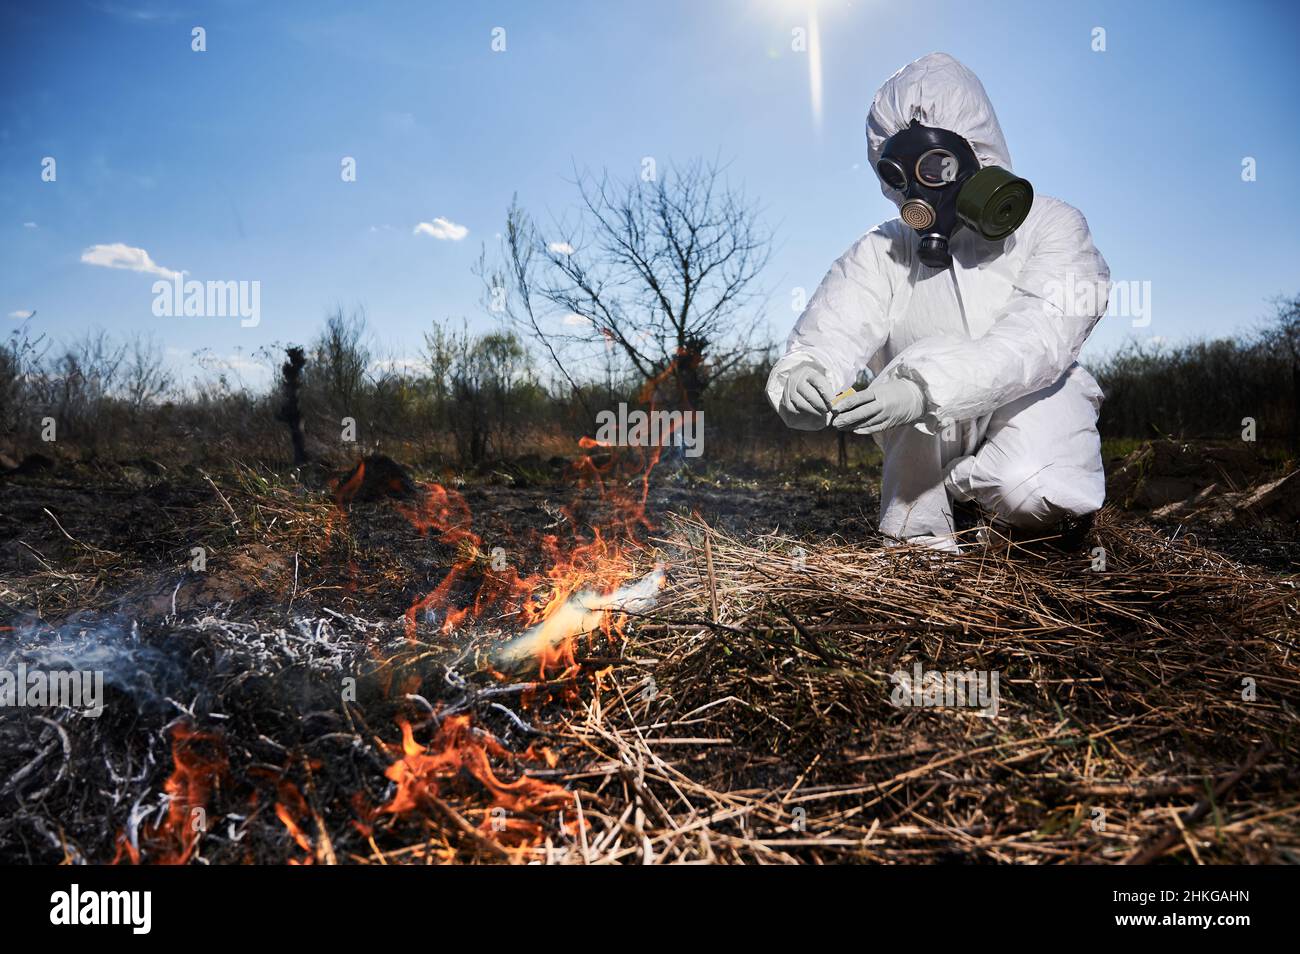 Unrecognizable person burning old dried grass in field. Focus on a fire. Ecologist holding matchbox and setting fire to dry grass under blue sky, wearing protective radiation suit and respirator. Stock Photo